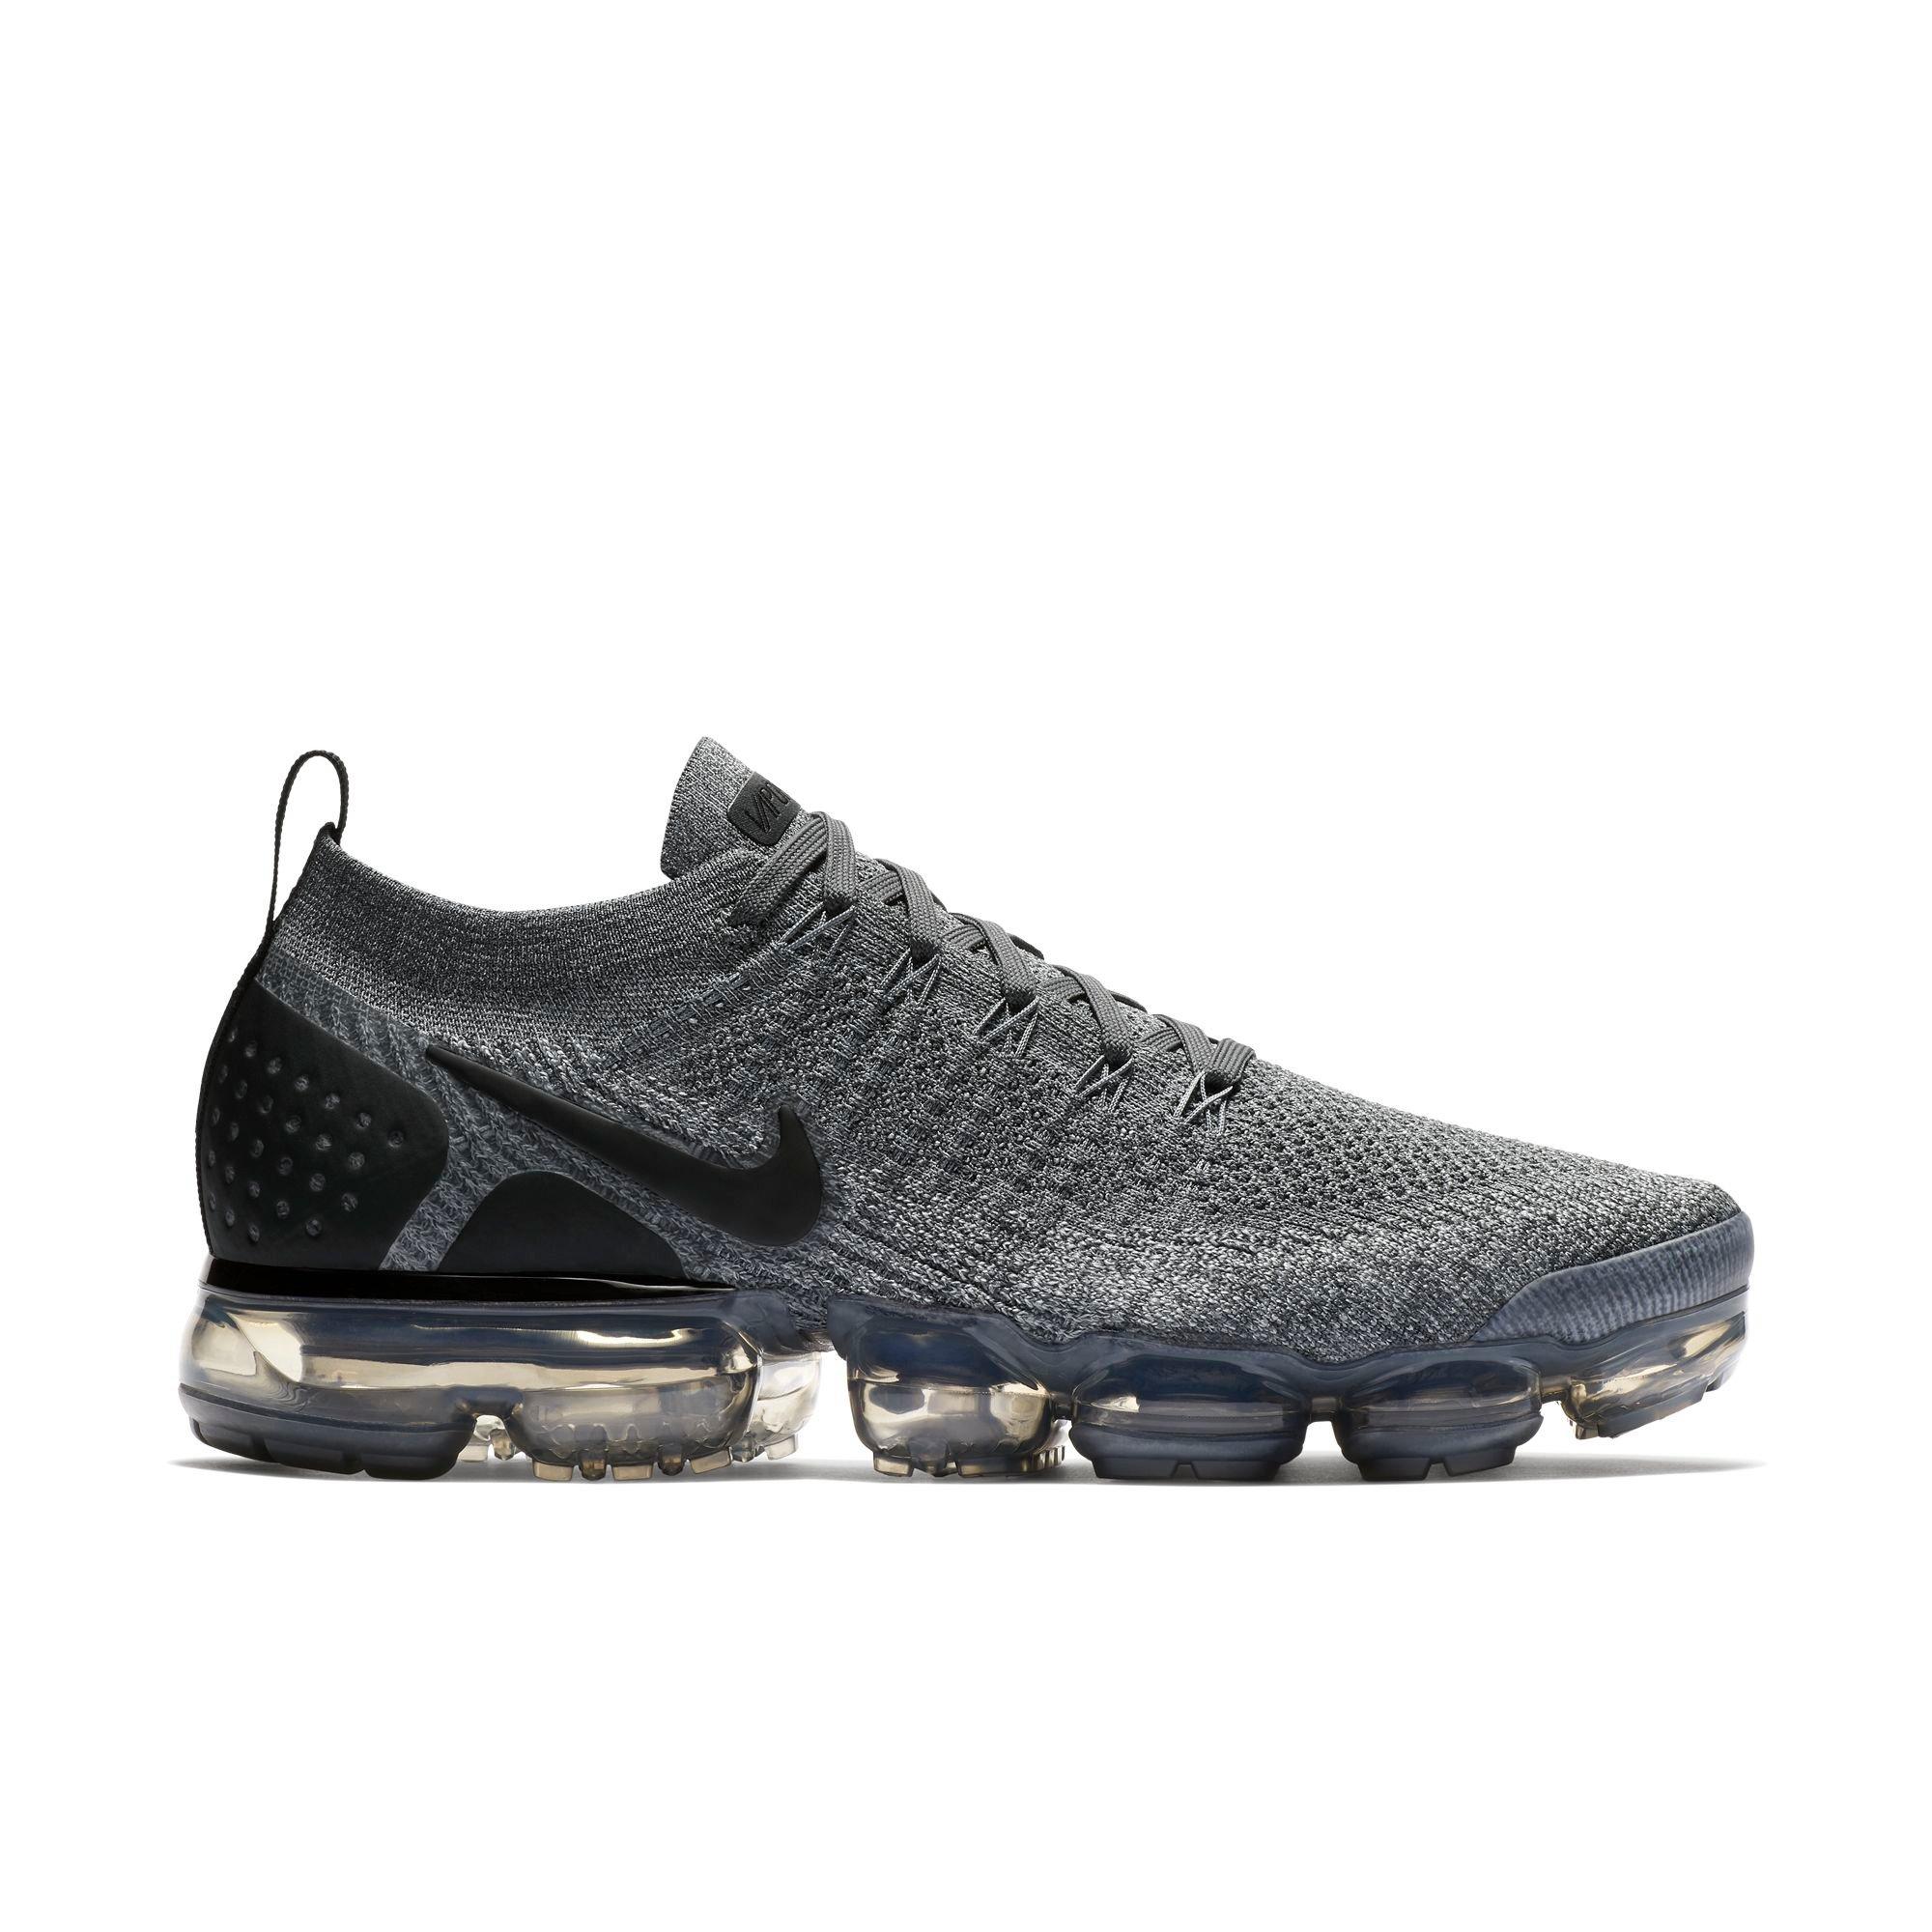 vapormax flyknit 2 black and grey